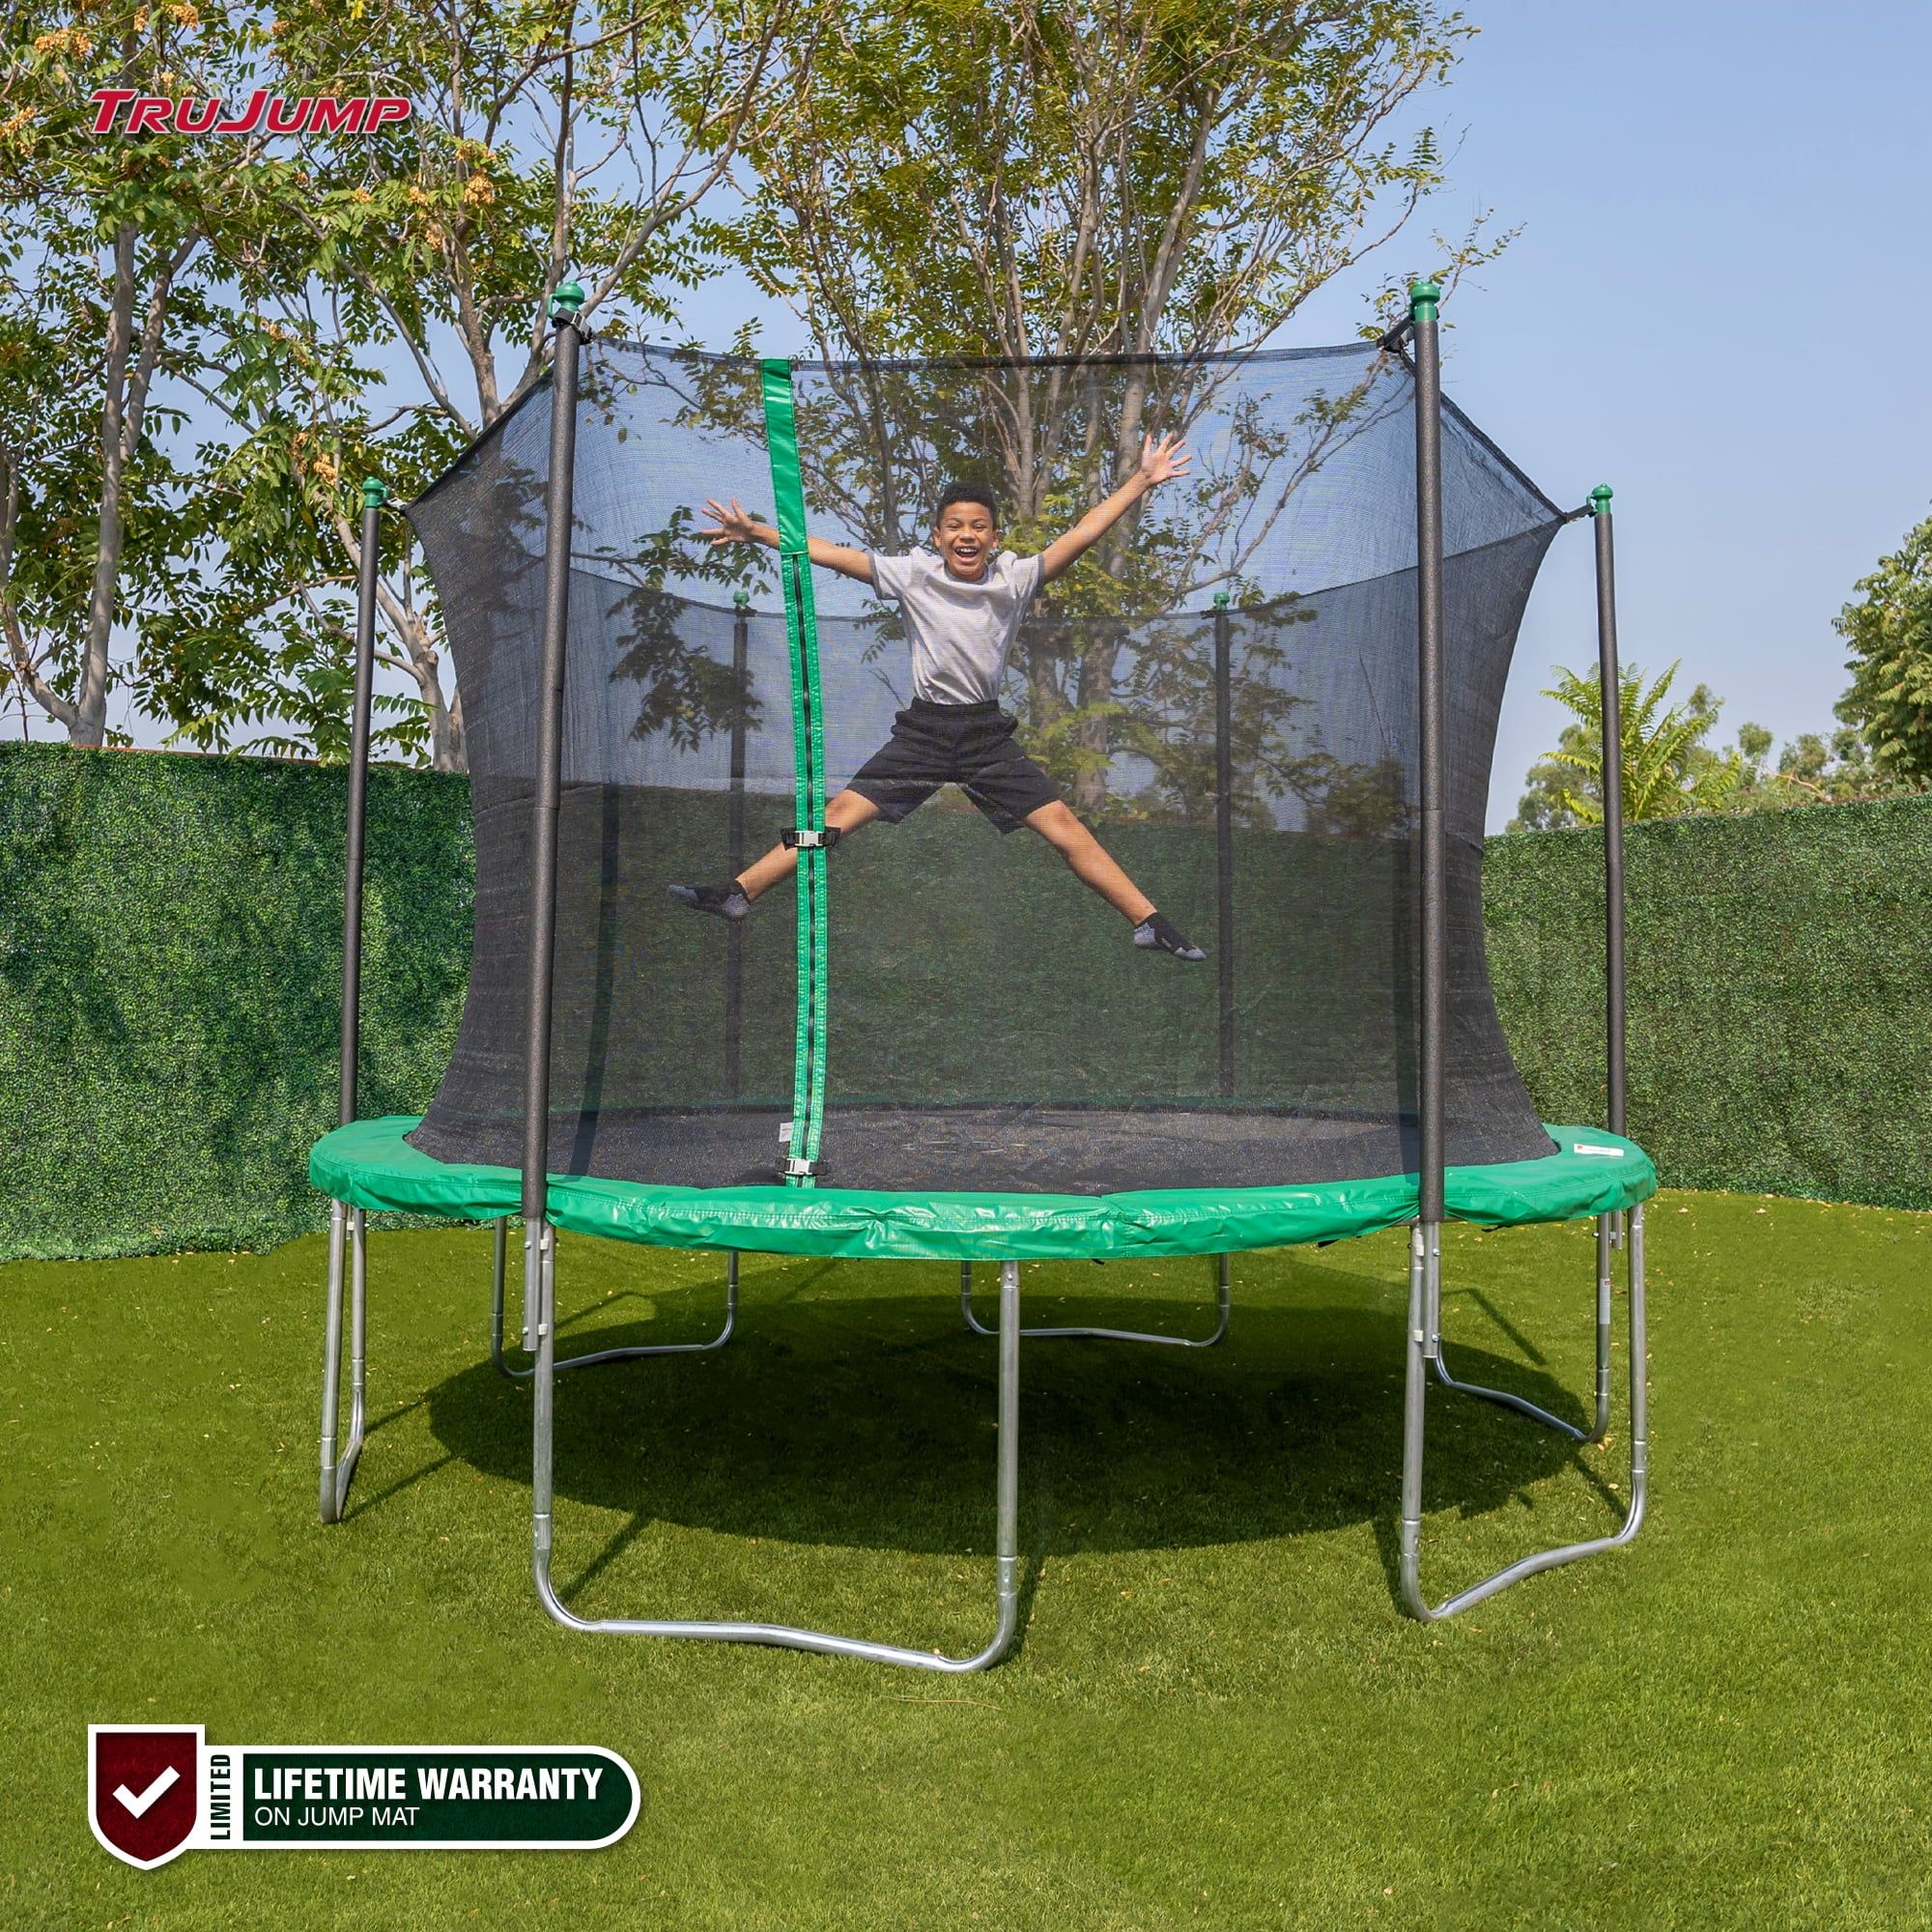 TruJump 12' Trampoline with Safety Enclosure & Jump Mat with Lifetime Warranty (Green) | Walmart (US)